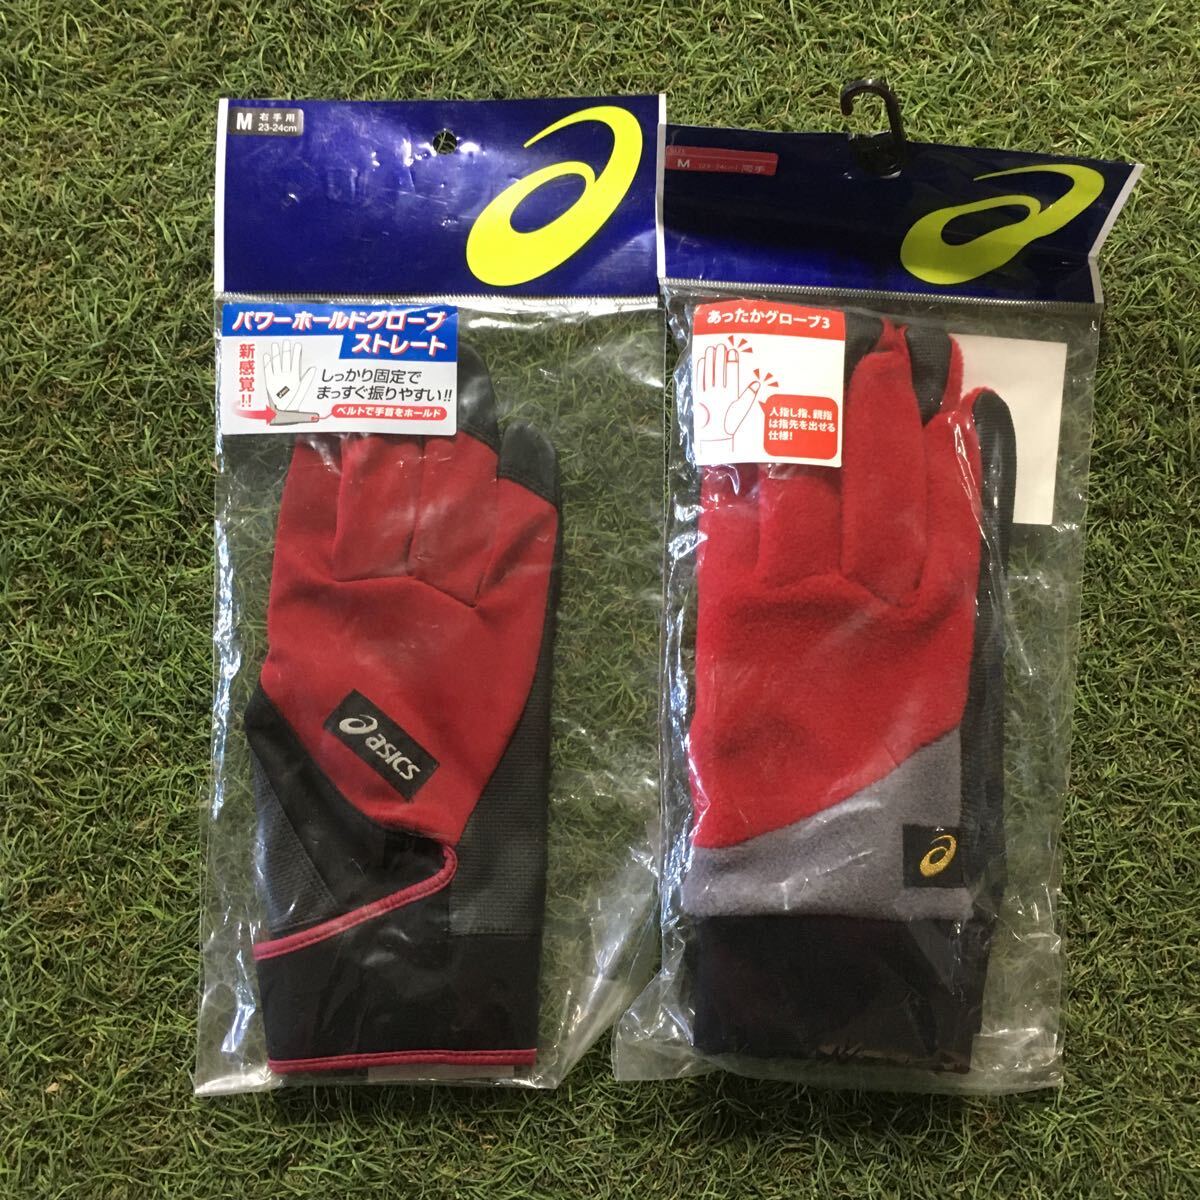 RR316-E13 asics mesh glove magnet attaching finger glove power Hold glove for sport goods M size 6 point unused exhibition goods accessories 